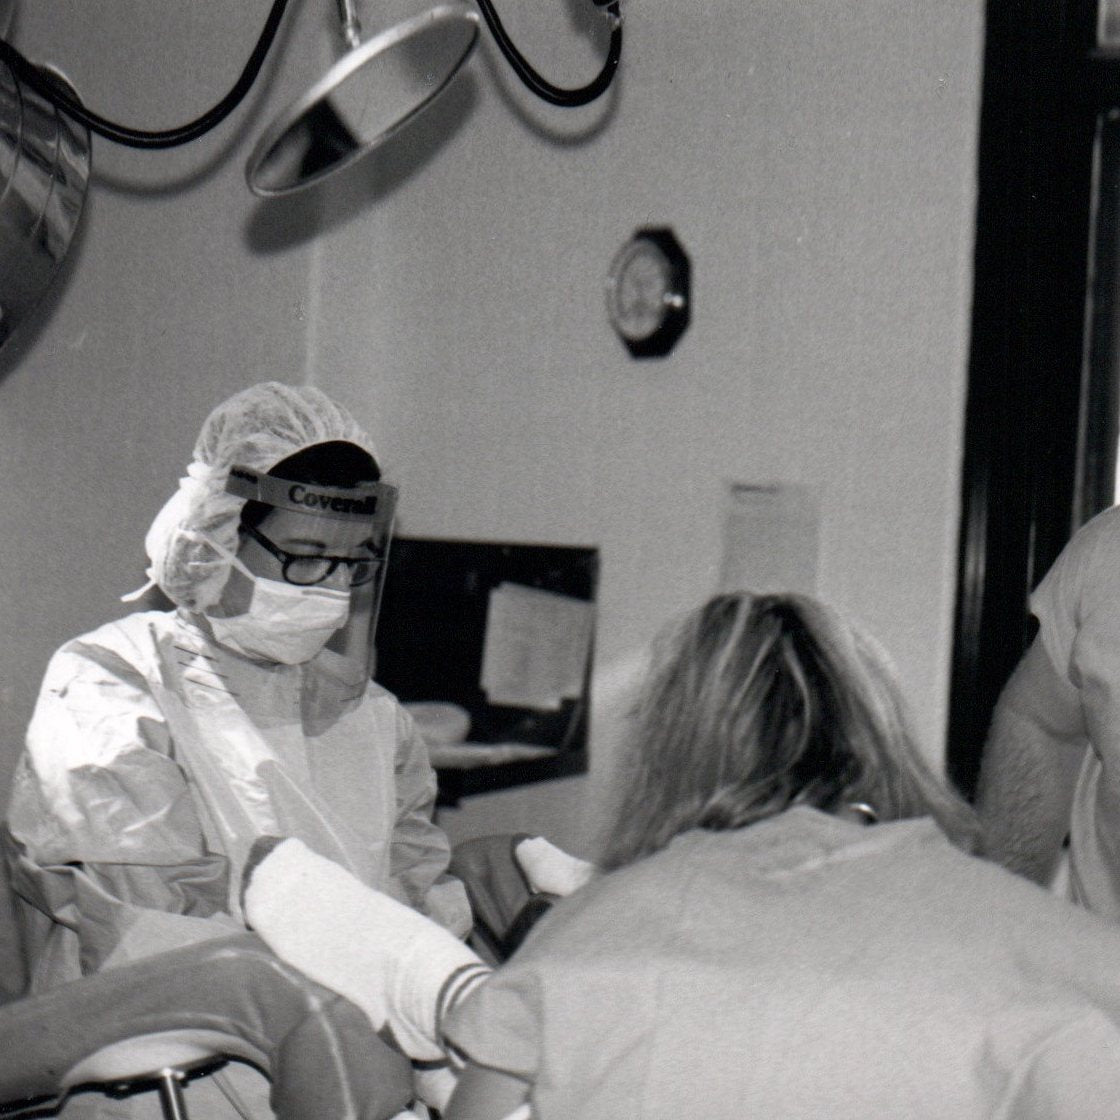 Dr. Falzon in action, delivering a baby in 1992